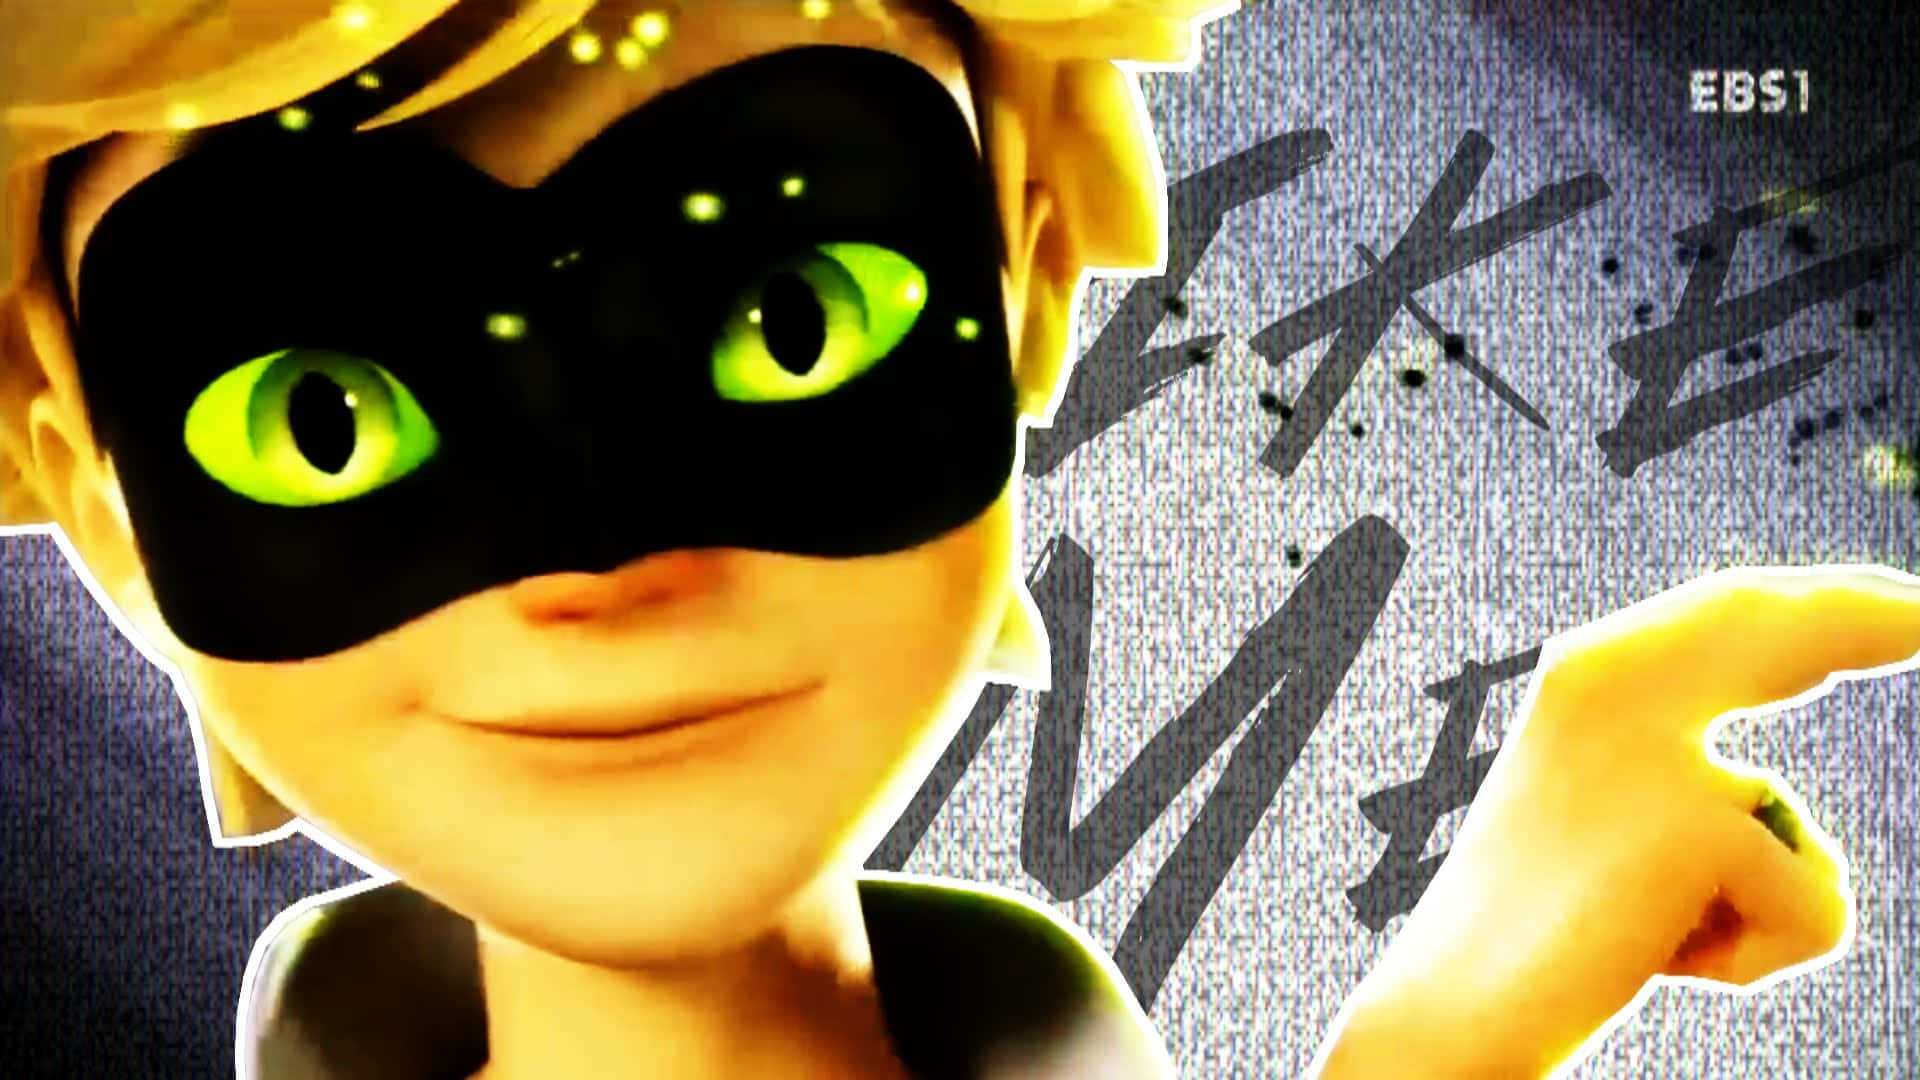 “the Mysterious Chat Noir Prowls At Night”